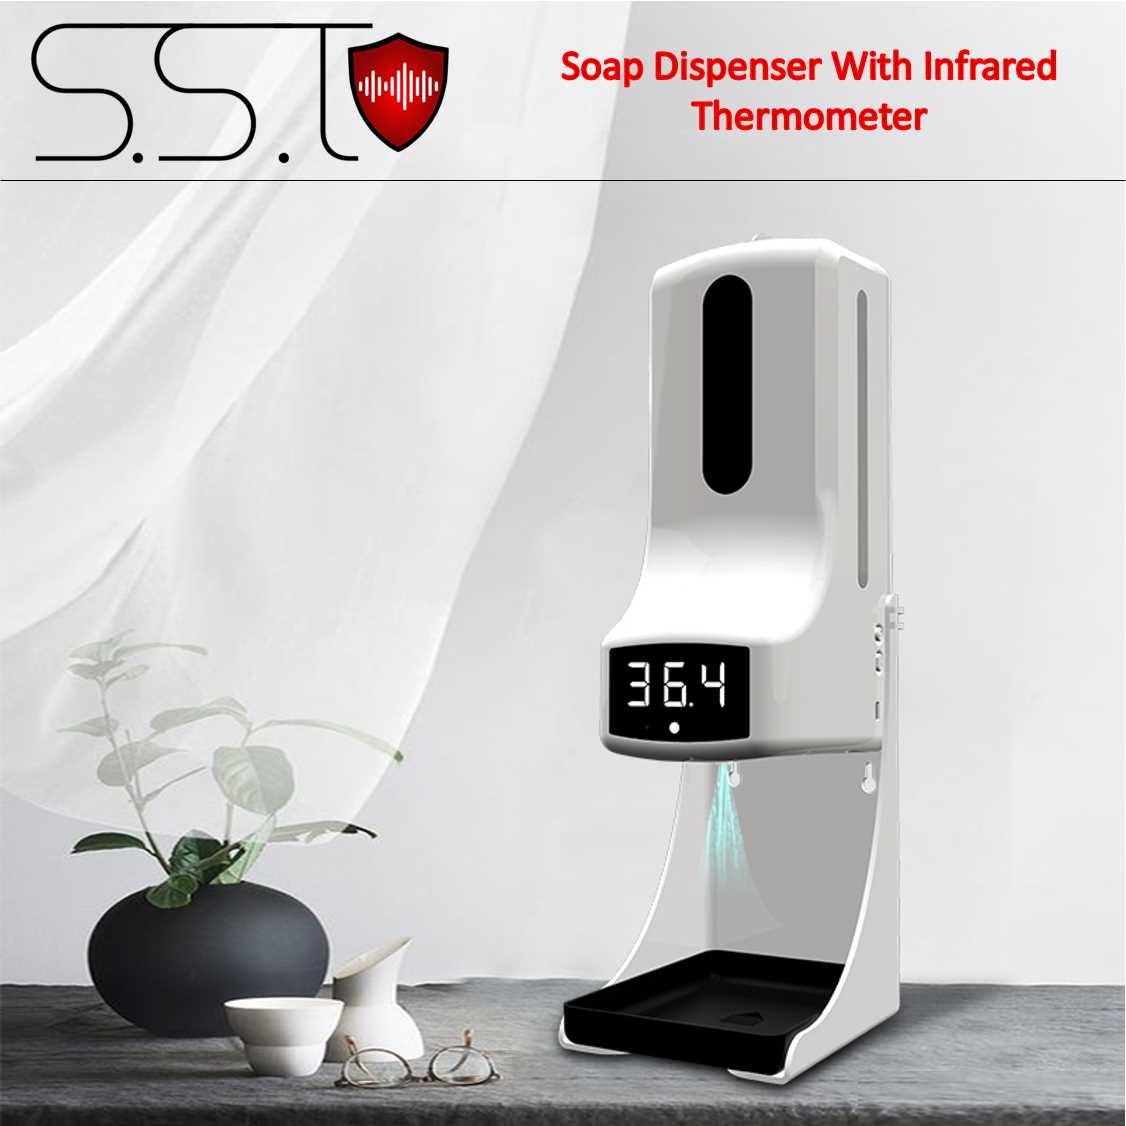 Non Contact Soap Dispenser With Infrared Thermometer For Sale Sound And Safety Technologies (SSTechnologies) Sri Lanka.